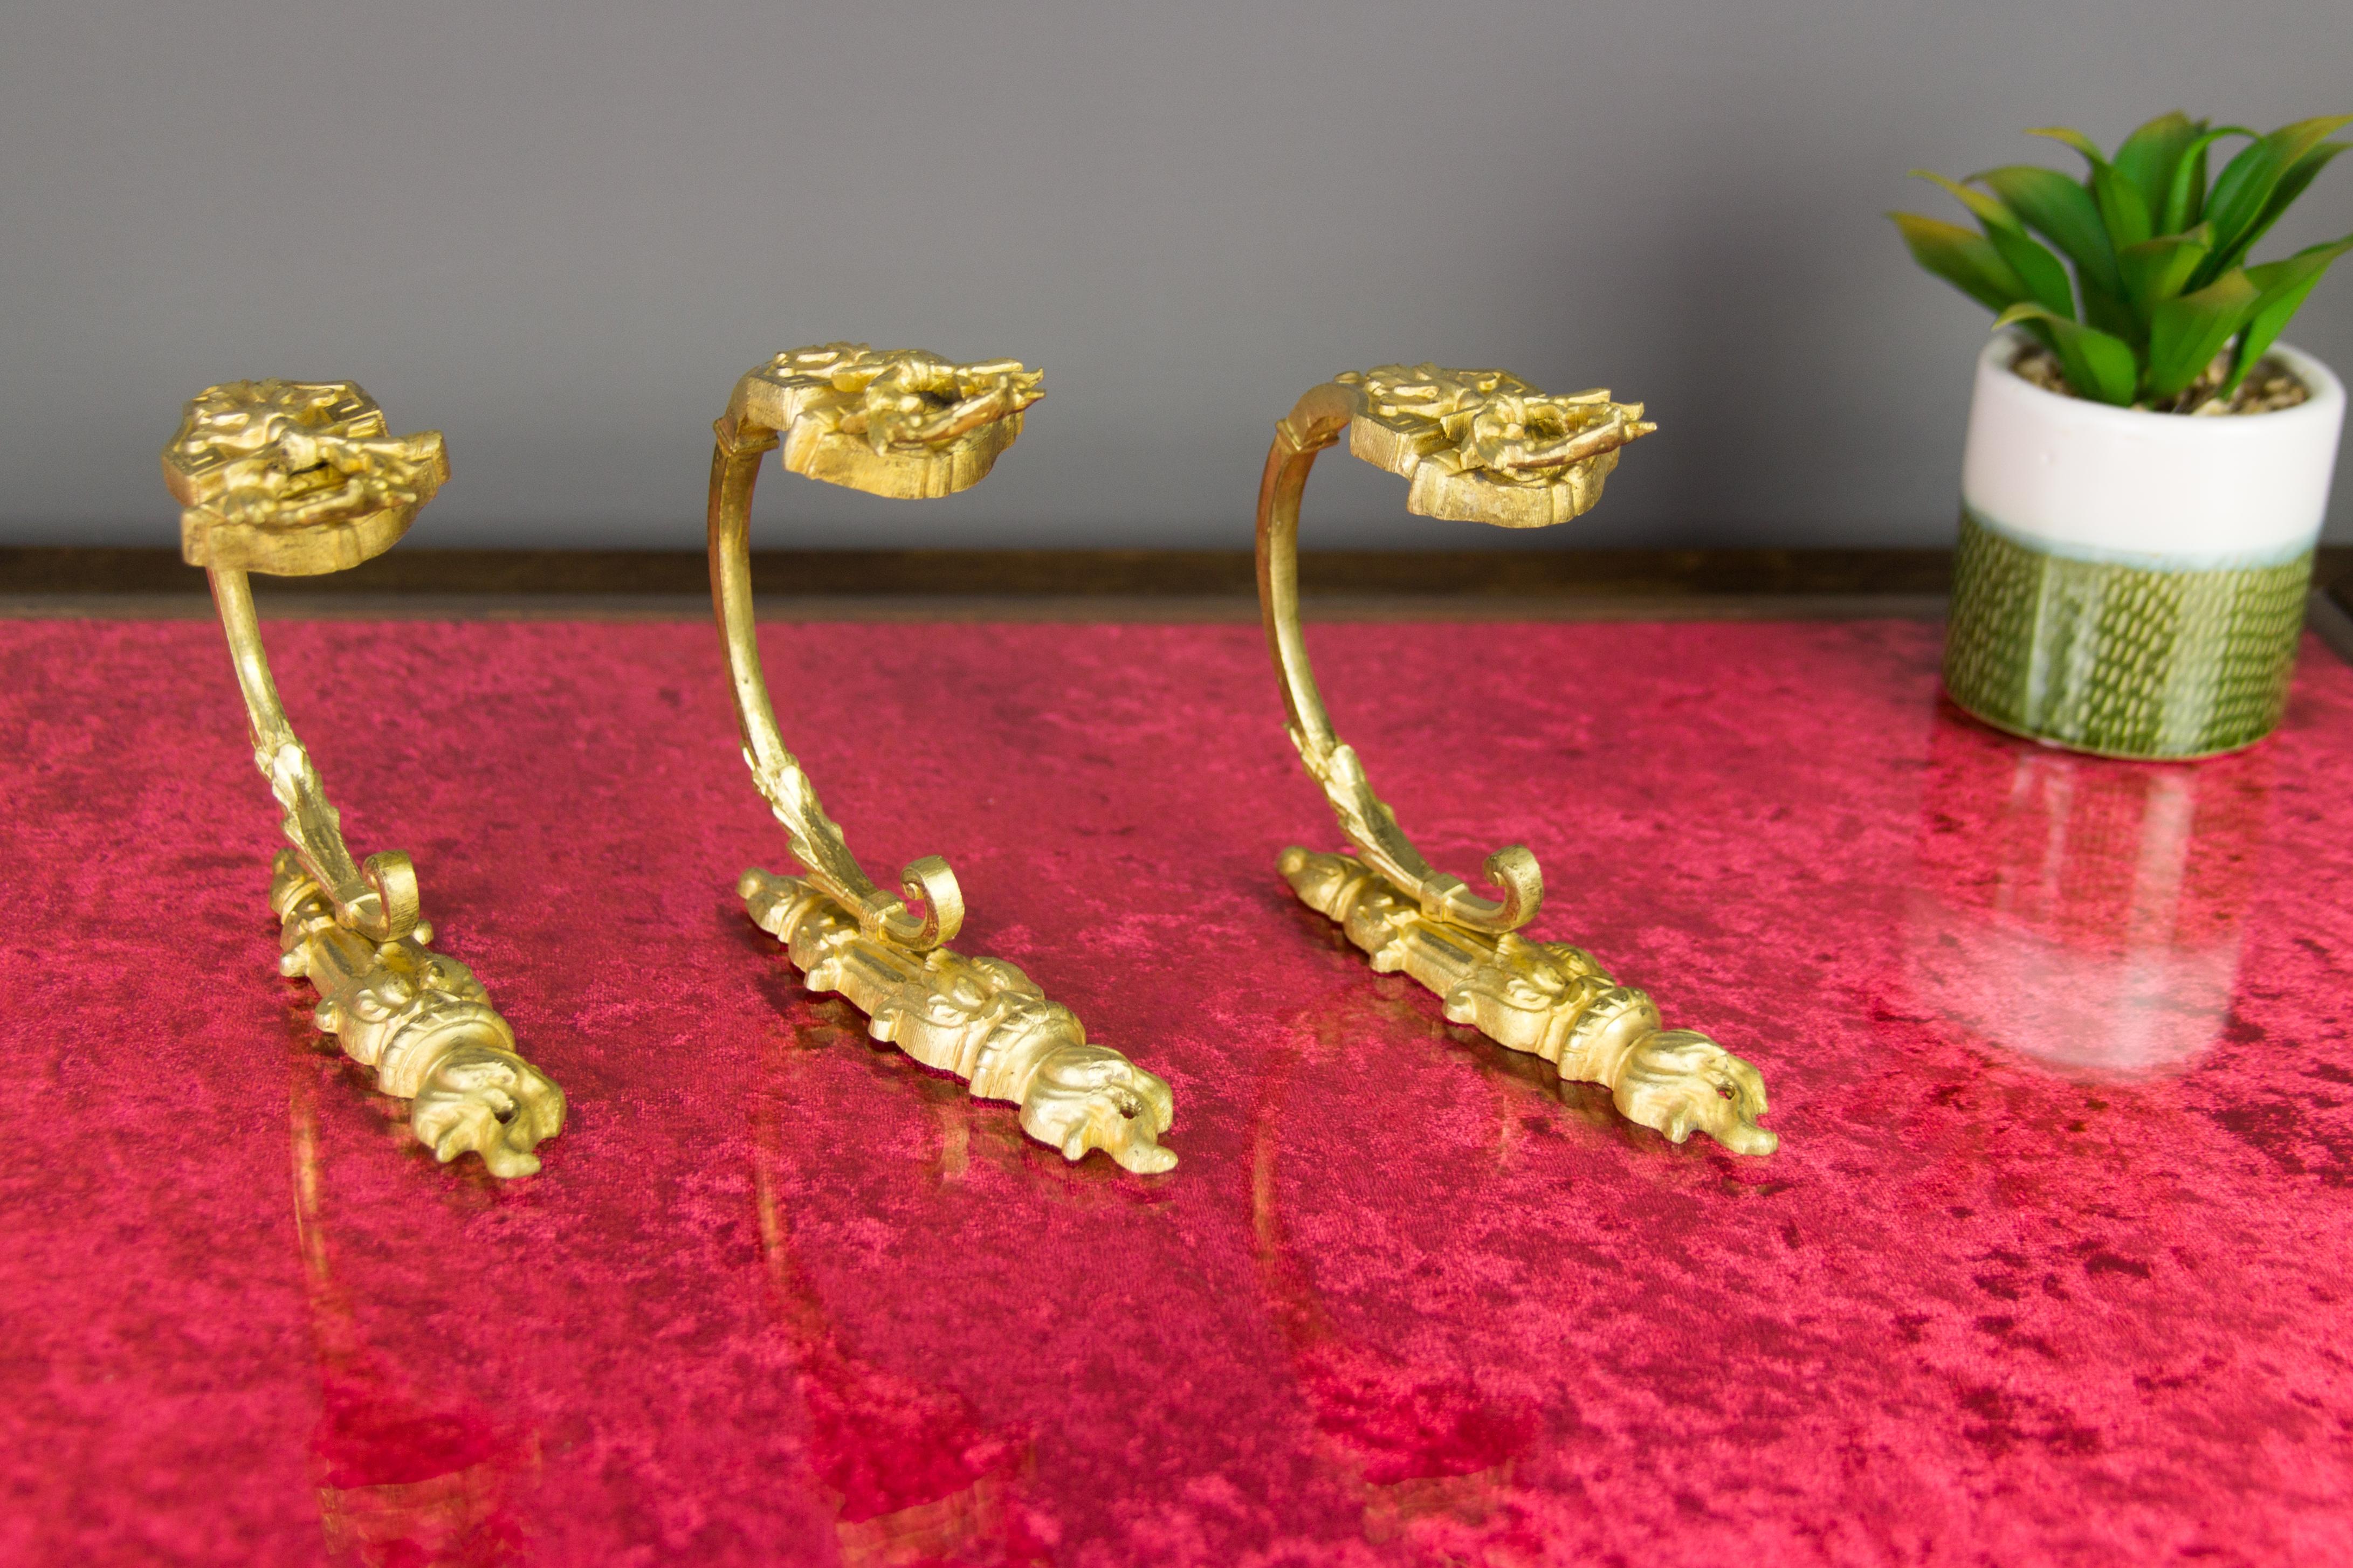 Napoleon III French Gilt Bronze Curtain Tiebacks or Curtain Holders Signed A.D., Set of 3 For Sale